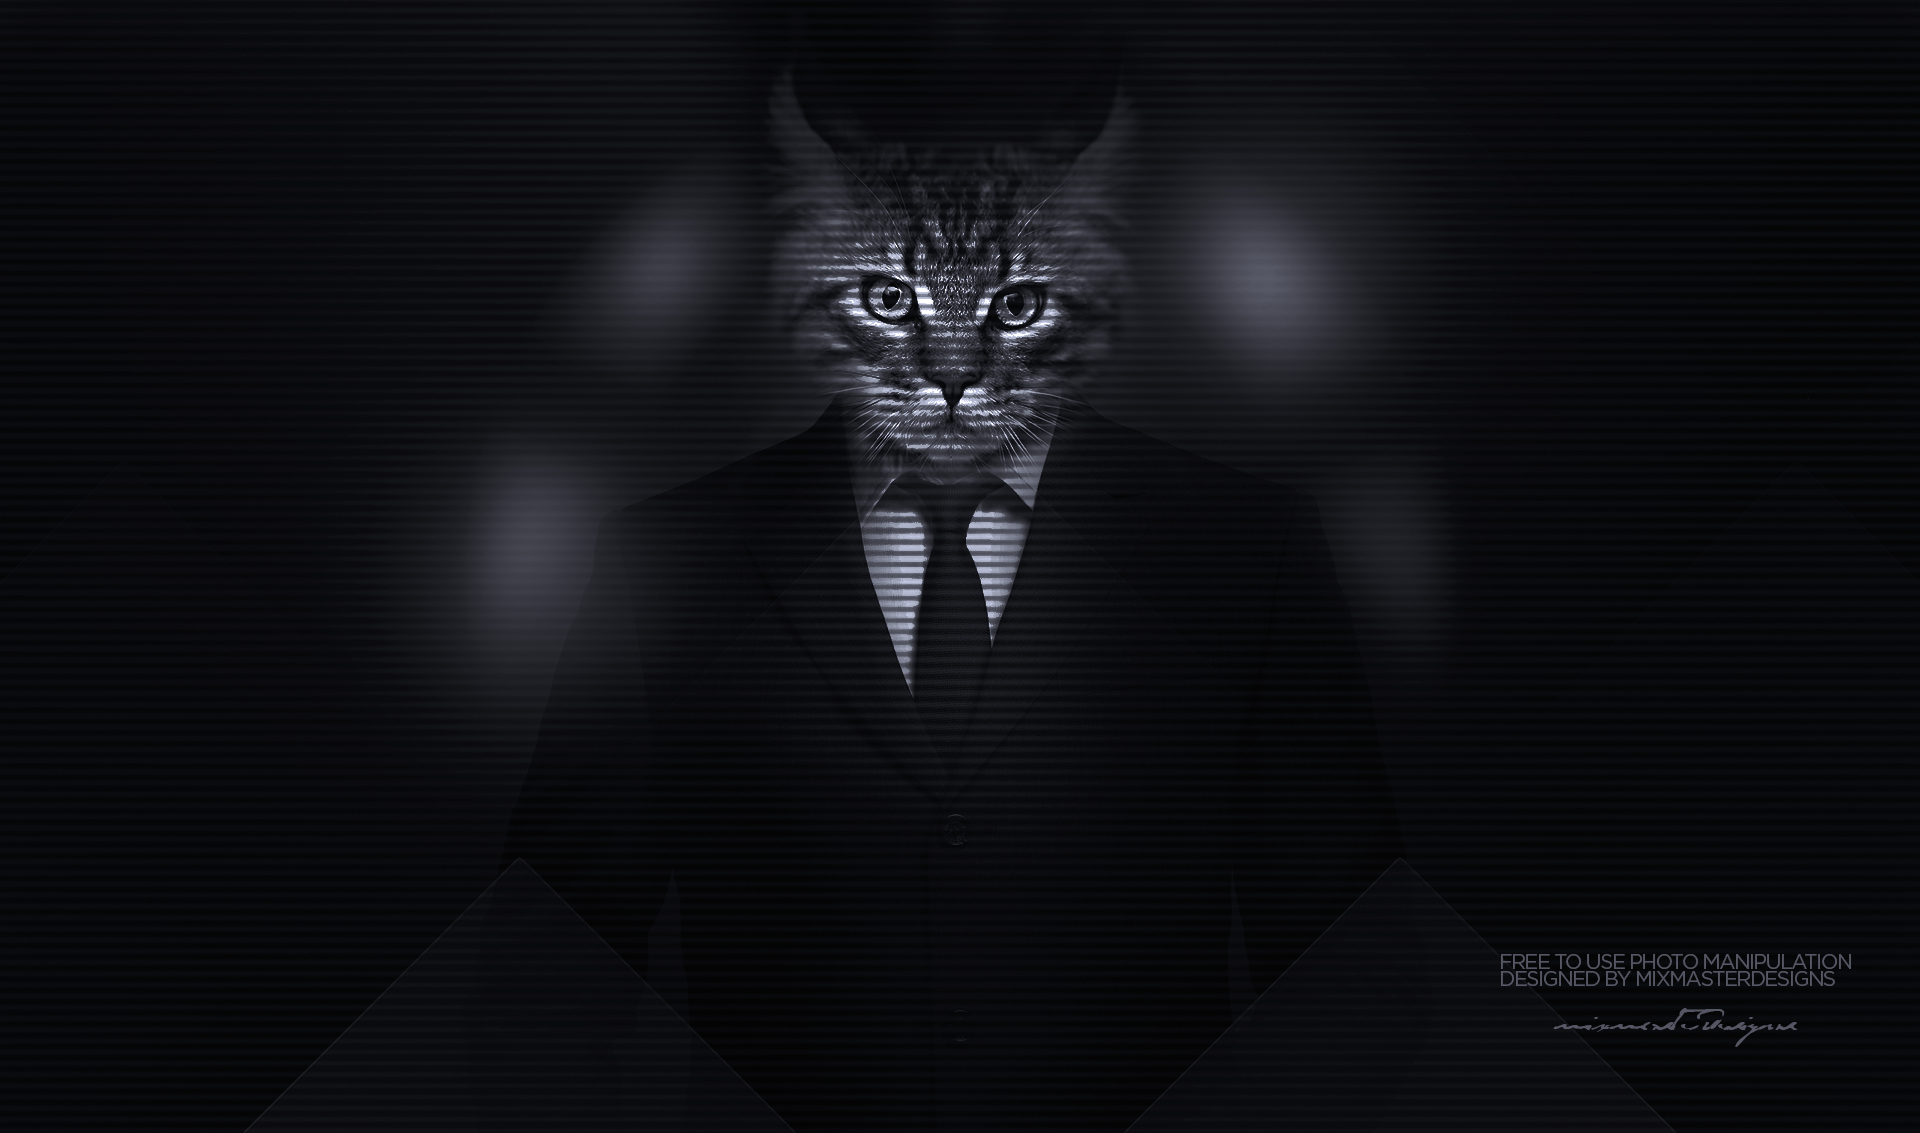 Kitty Cats Big Cats Majestic Casual Channel Photo Manipulation Men Classy Suits 1920x1133